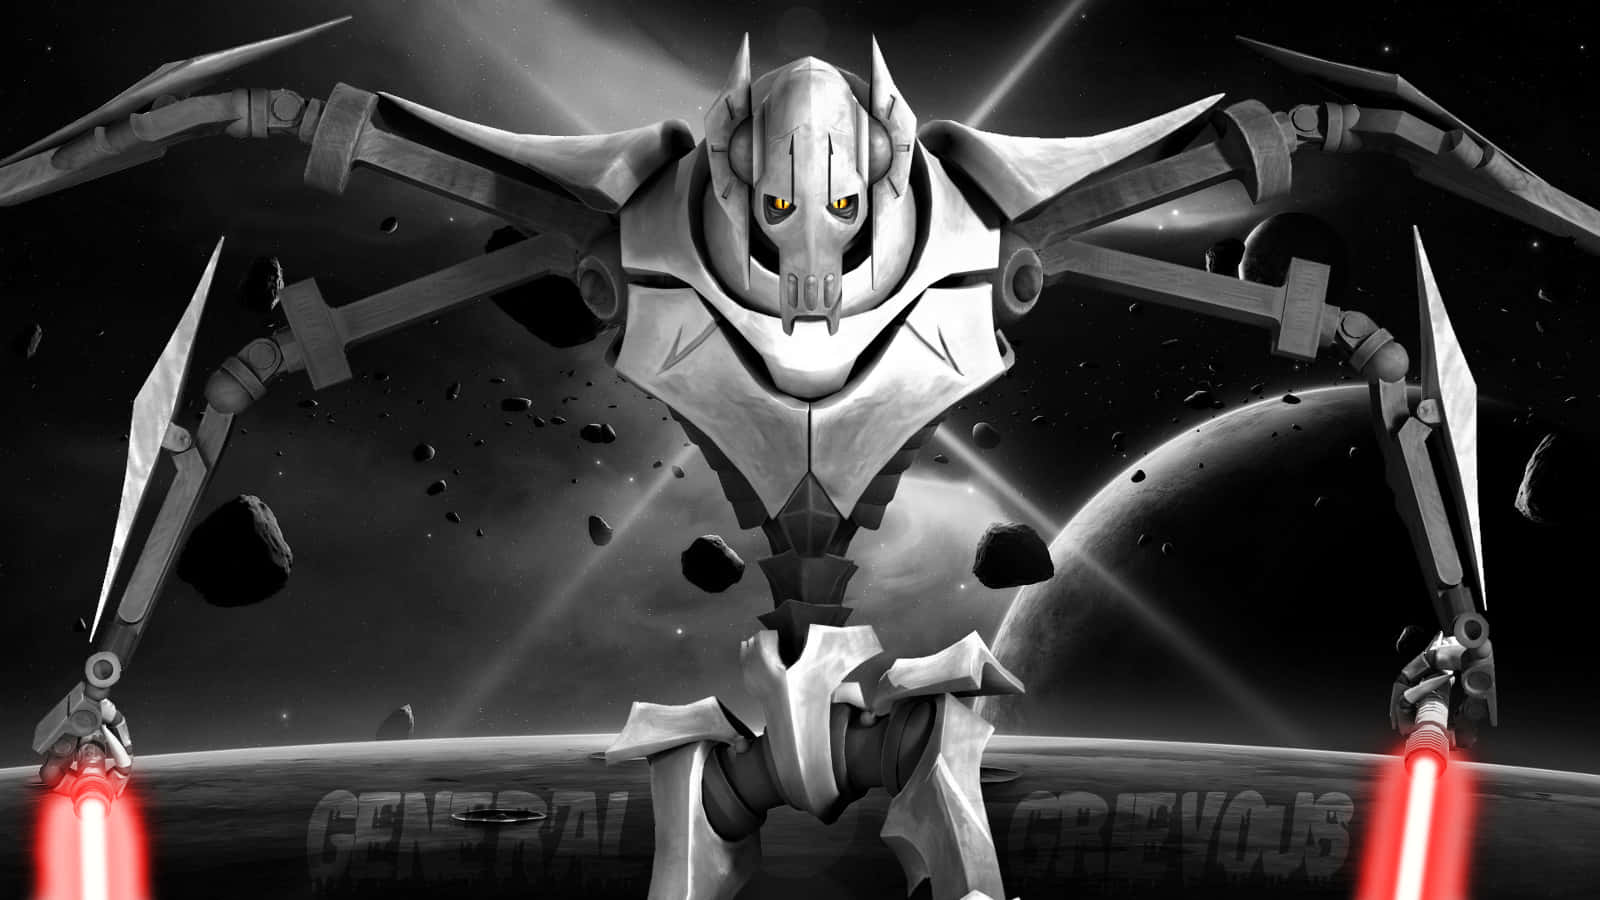 General Grievous, The Robotic Leader Of The Separatist Droid Army Background